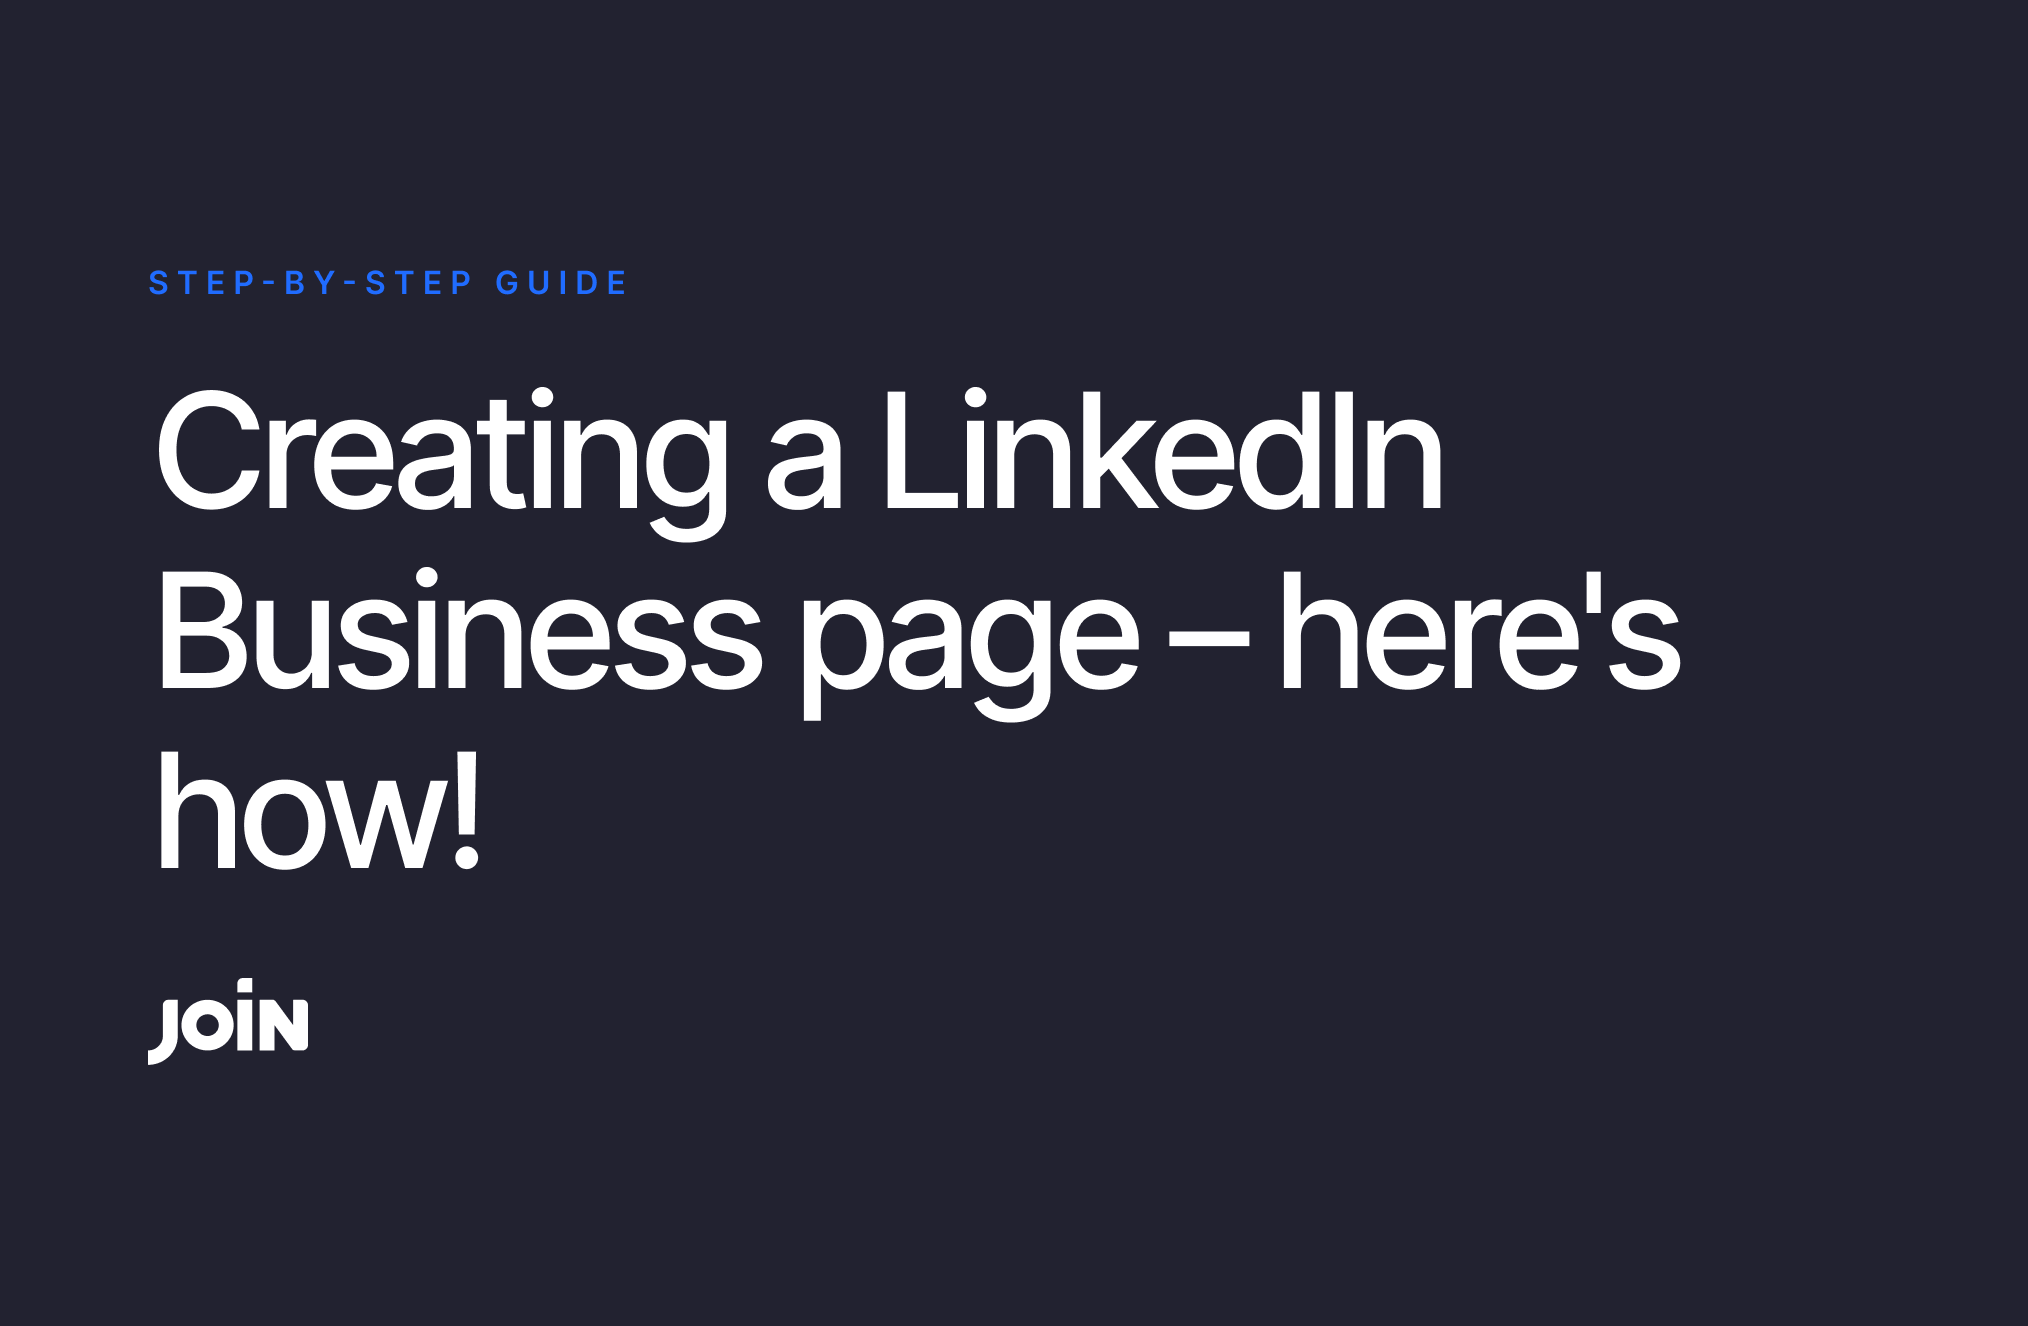 How to create a LinkedIn Business page